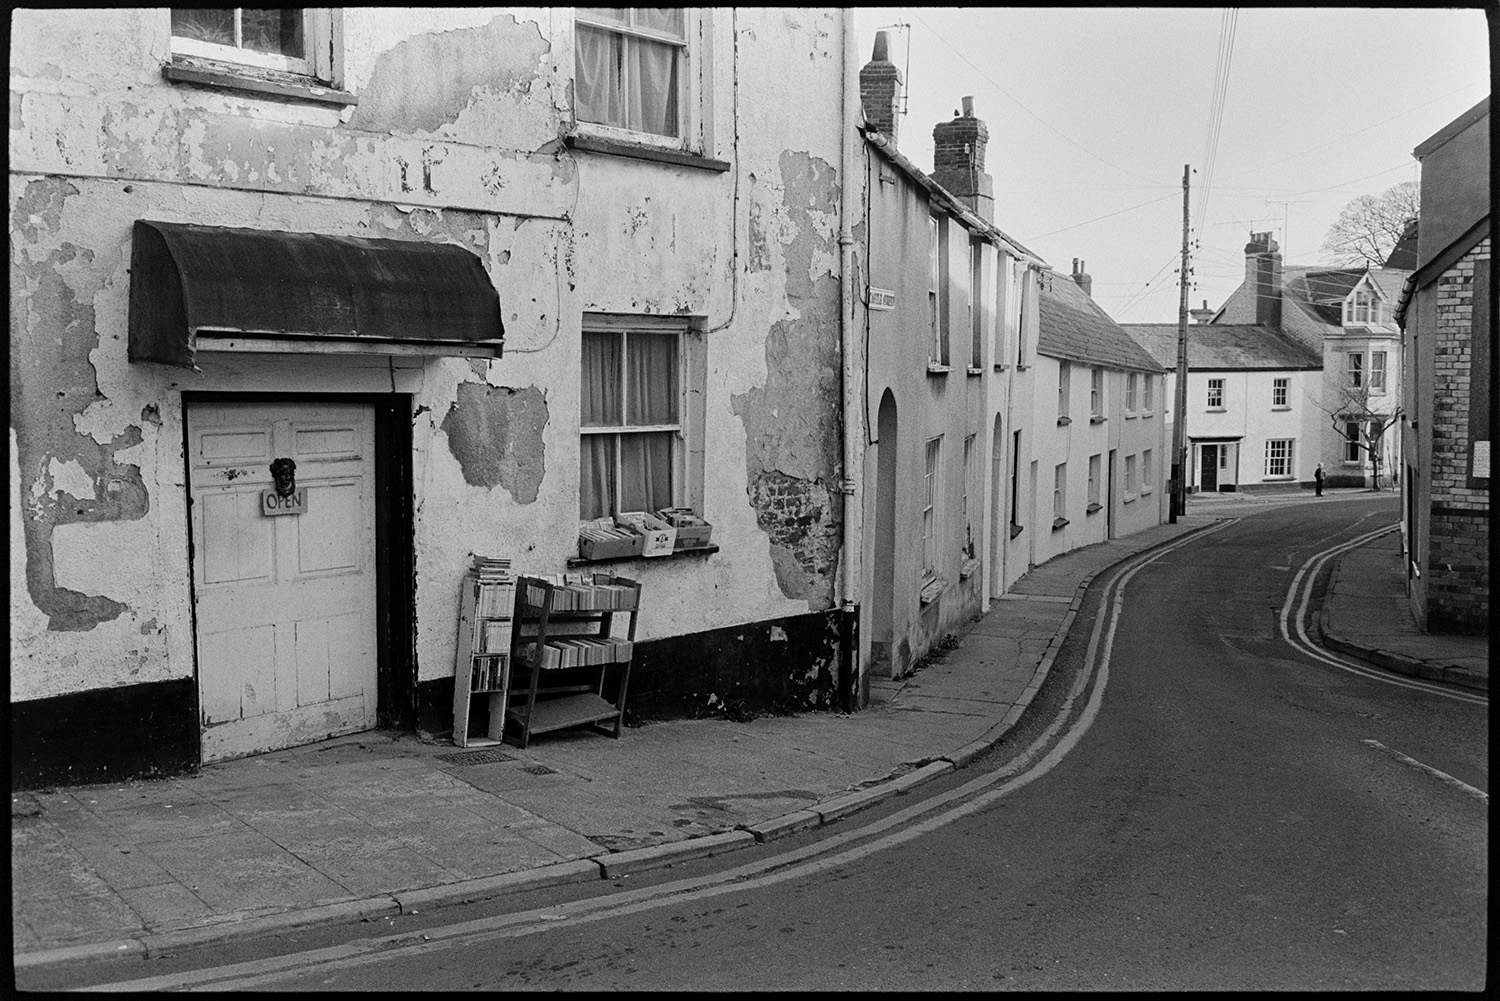 Street scenes with decaying front of antique shop, market.
[A view of Castle Street, Torrington with a crumbling house or antique shop with books for sale outside displayed on bookshelves and the windowsill.  An open sign is on the door knocker and an awning is above the doorway.]